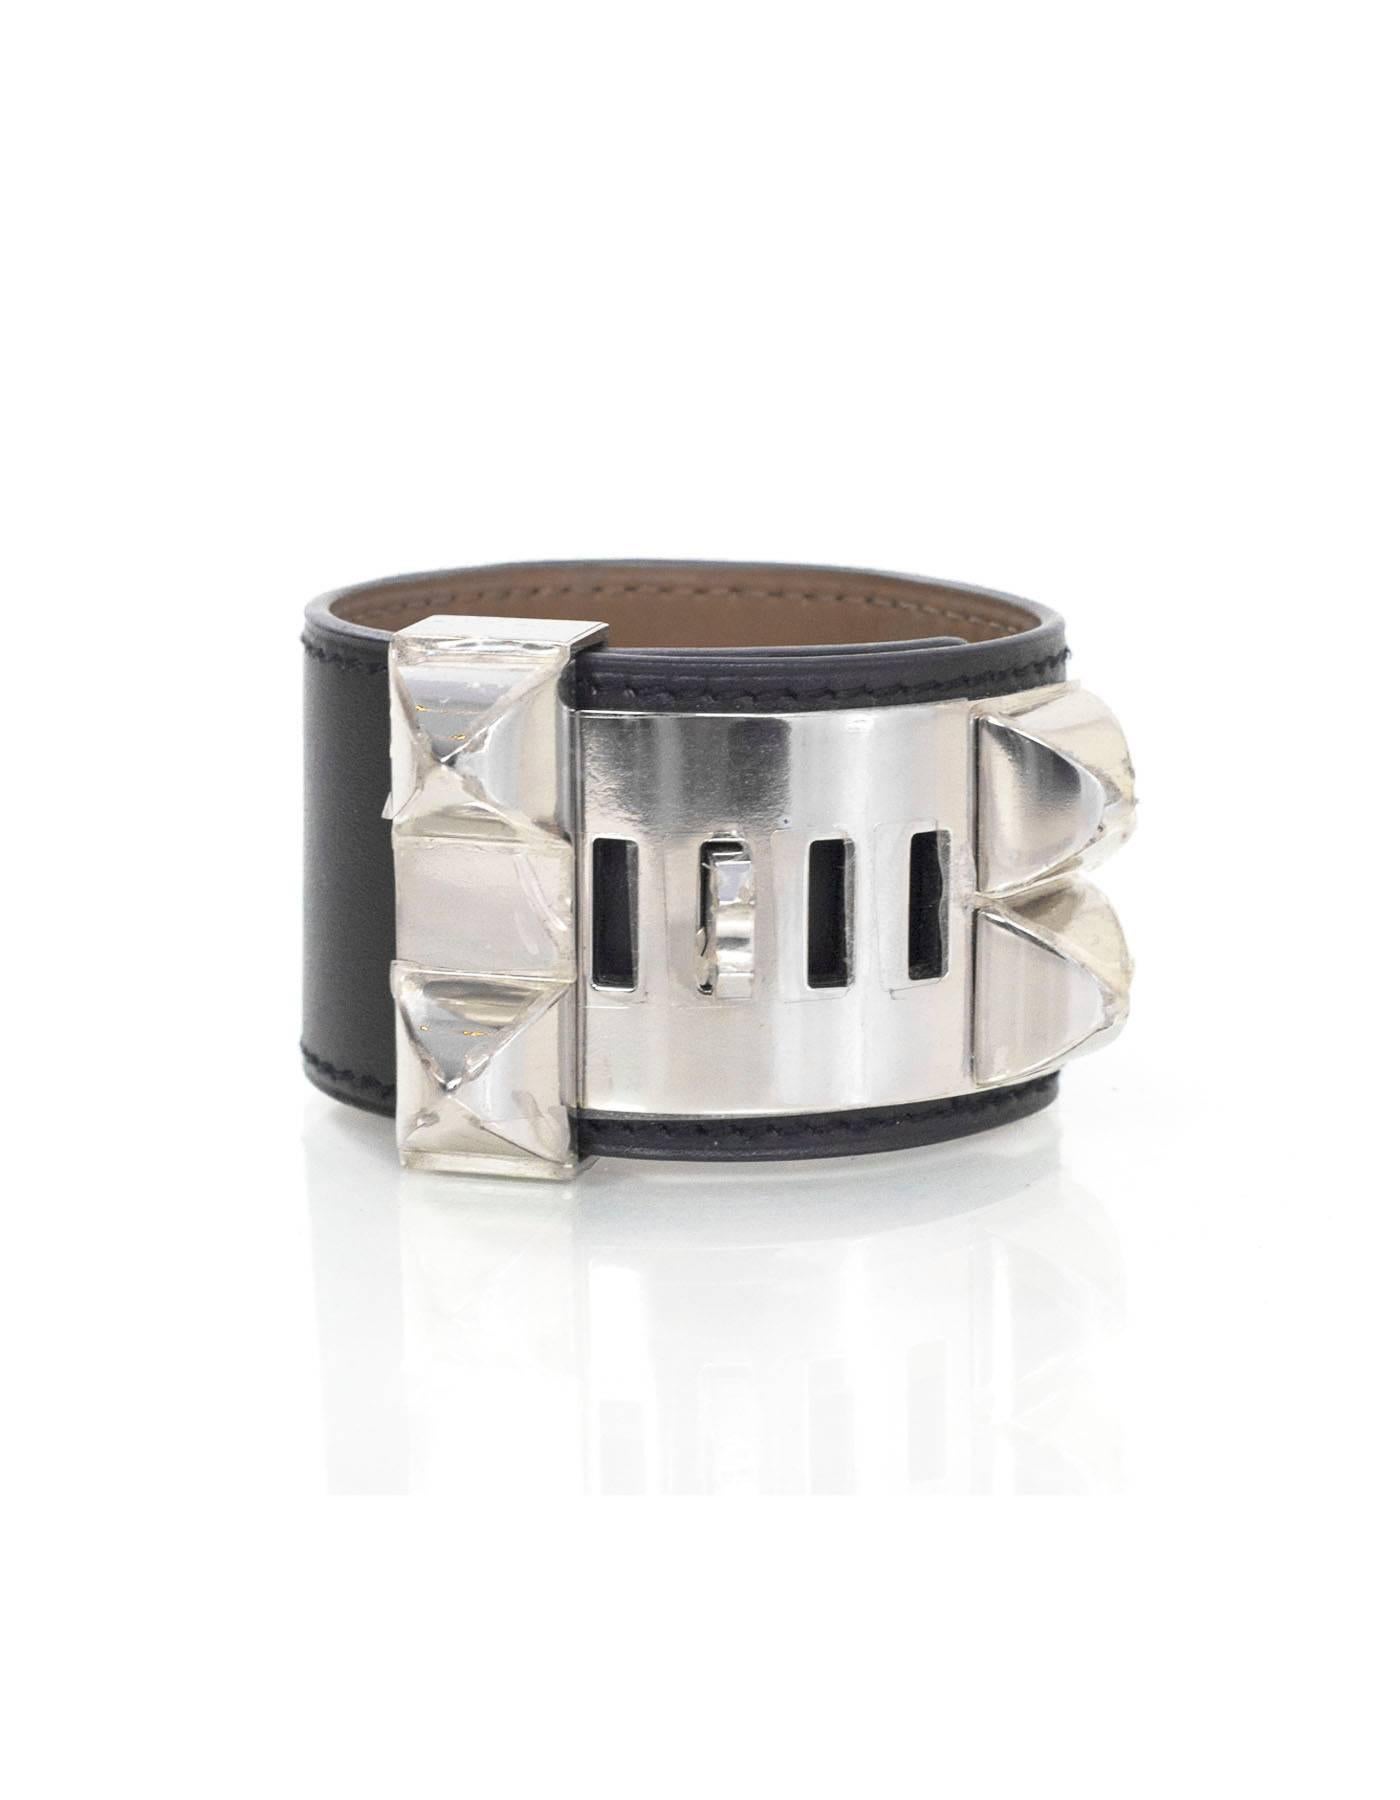 Hermes Black Leather CDC Bracelet 

Made In: France
Year of Production: 2013
Color: Black
Hardware: Palladium
Materials: Leather
Closure: Sliding stud and notch closure
Stamp: Q stamp in square
Retail Price: $1,150 + tax
Overall Condition: